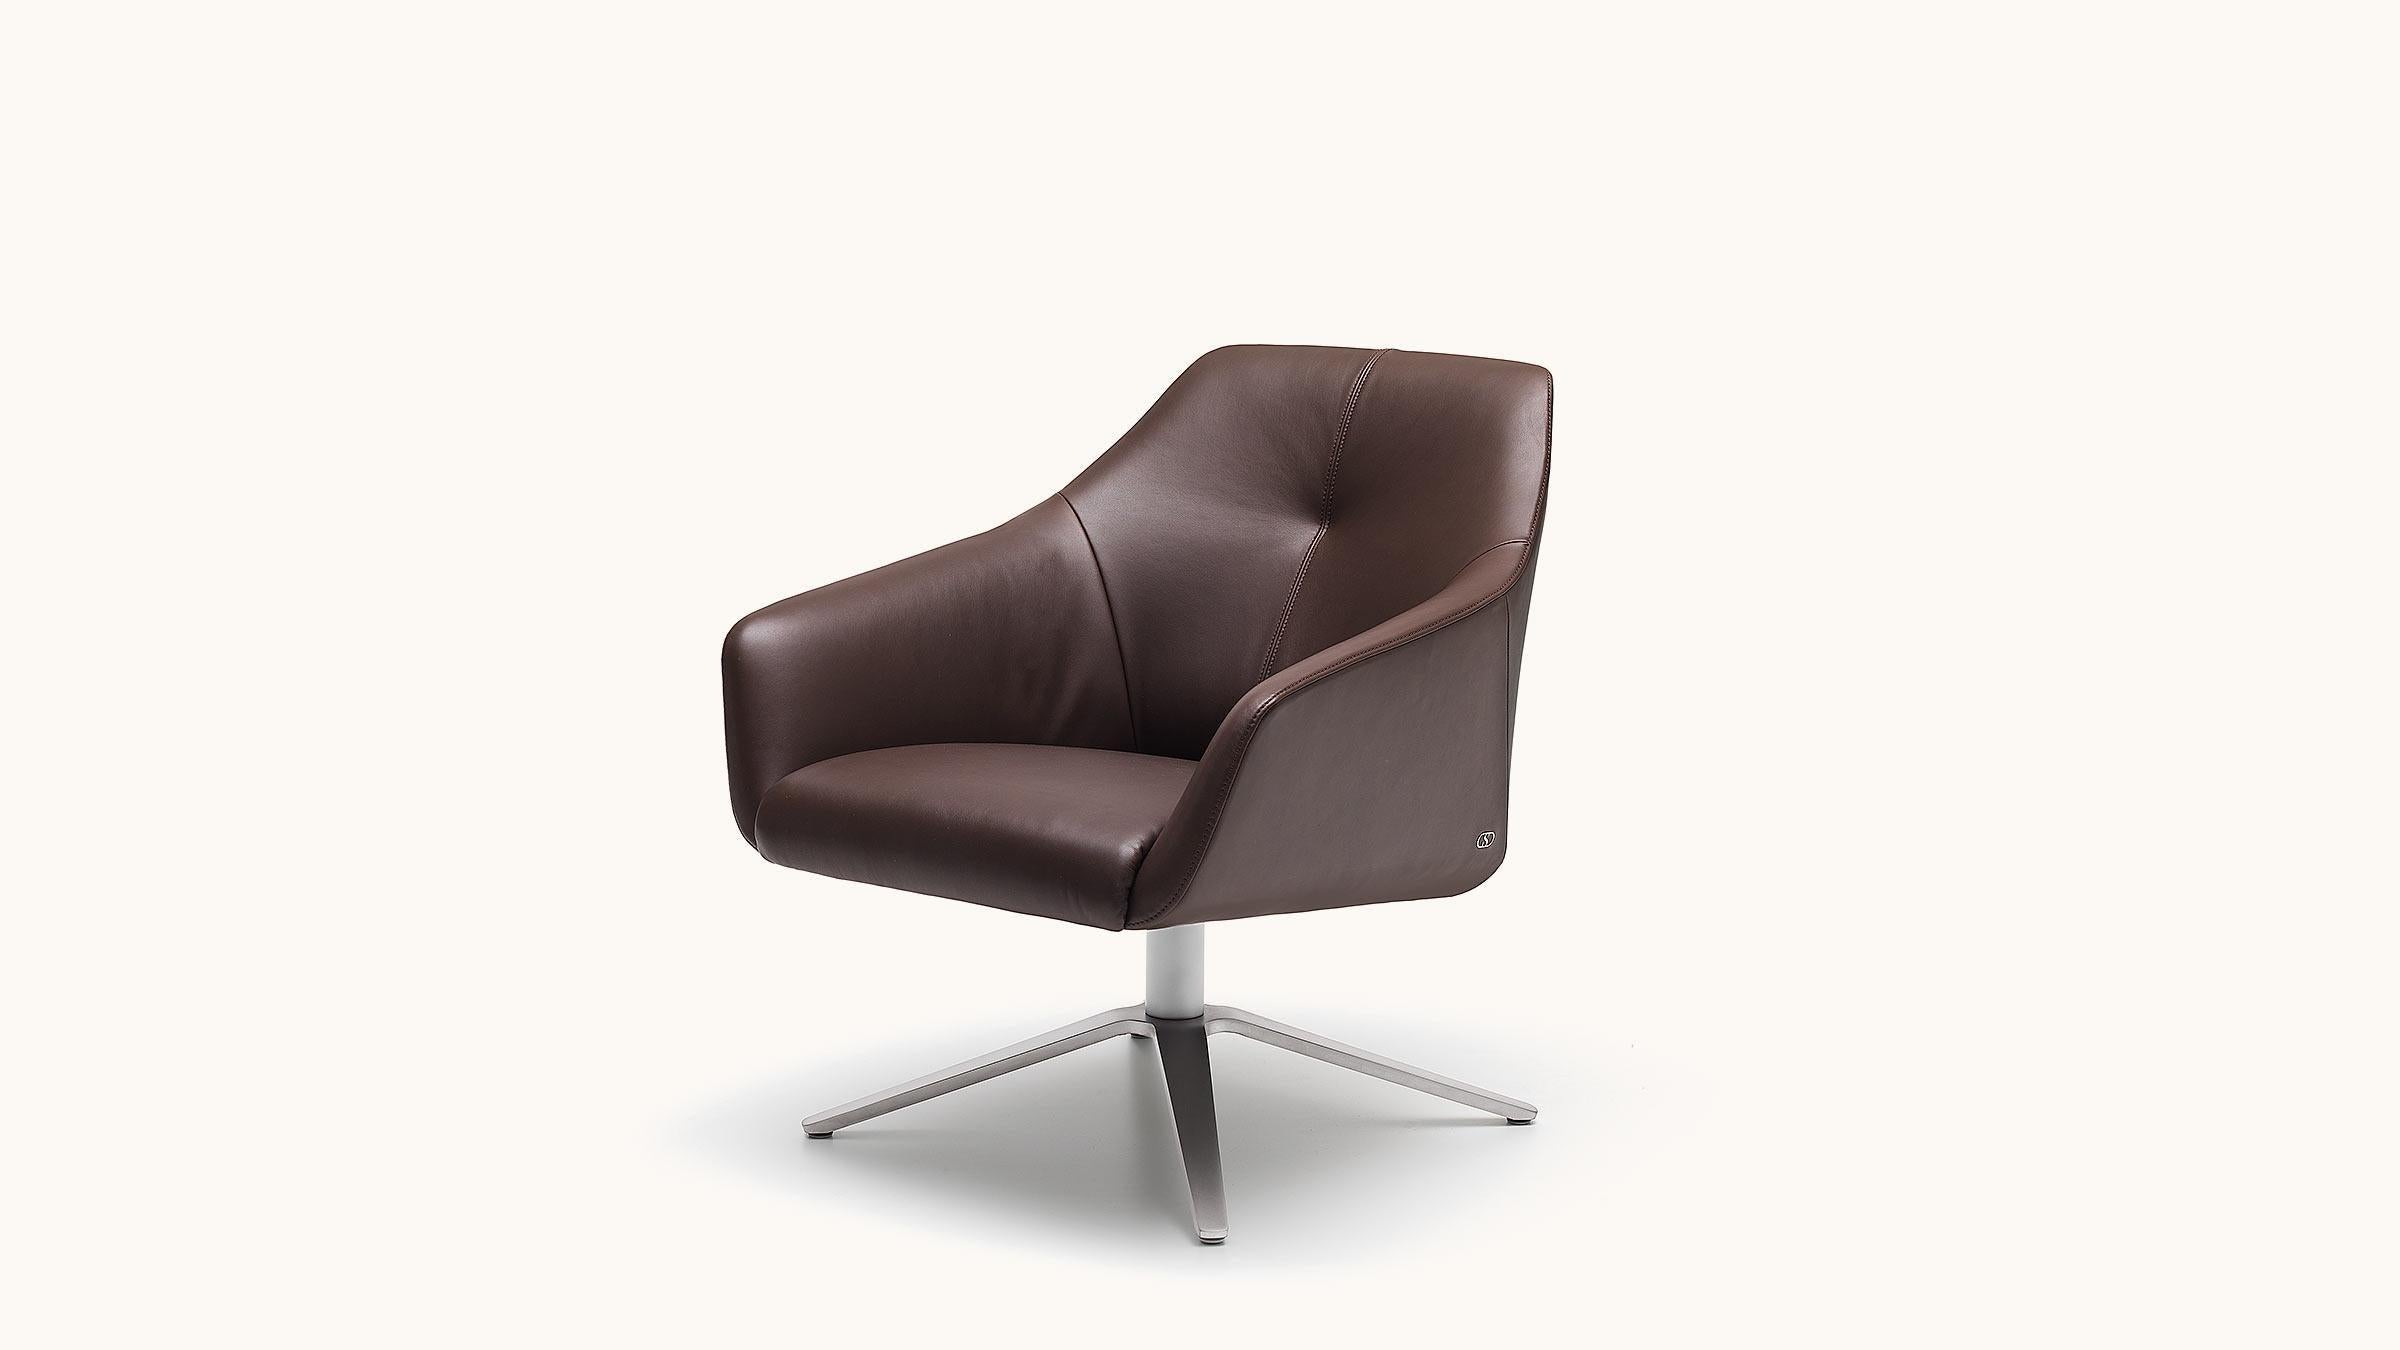 A relaxing miracle for all desires. Low- or high-backed chairs with a slender star base, as dining chairs or lounge chairs, for uplifting seating comfort with the highest esthetic standards. Formally exciting transition between the seat and back